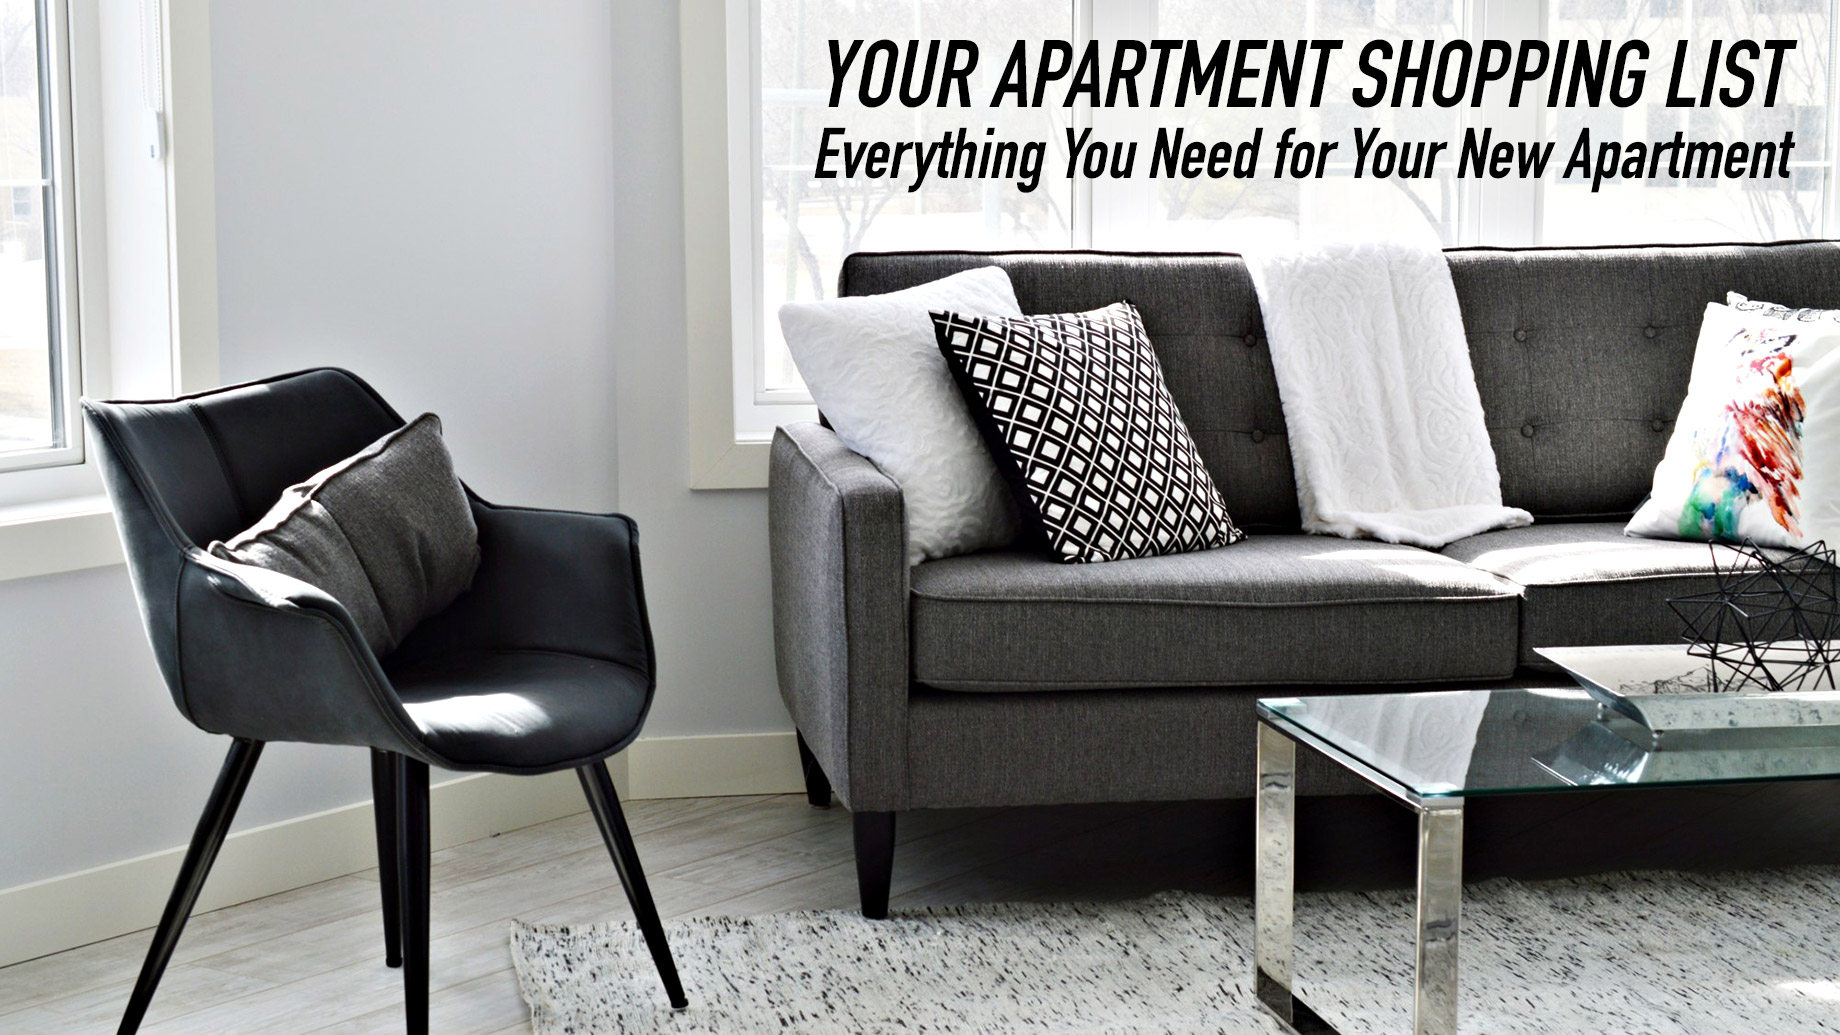 Your Apartment Shopping List - Everything You Need for Your New Apartment